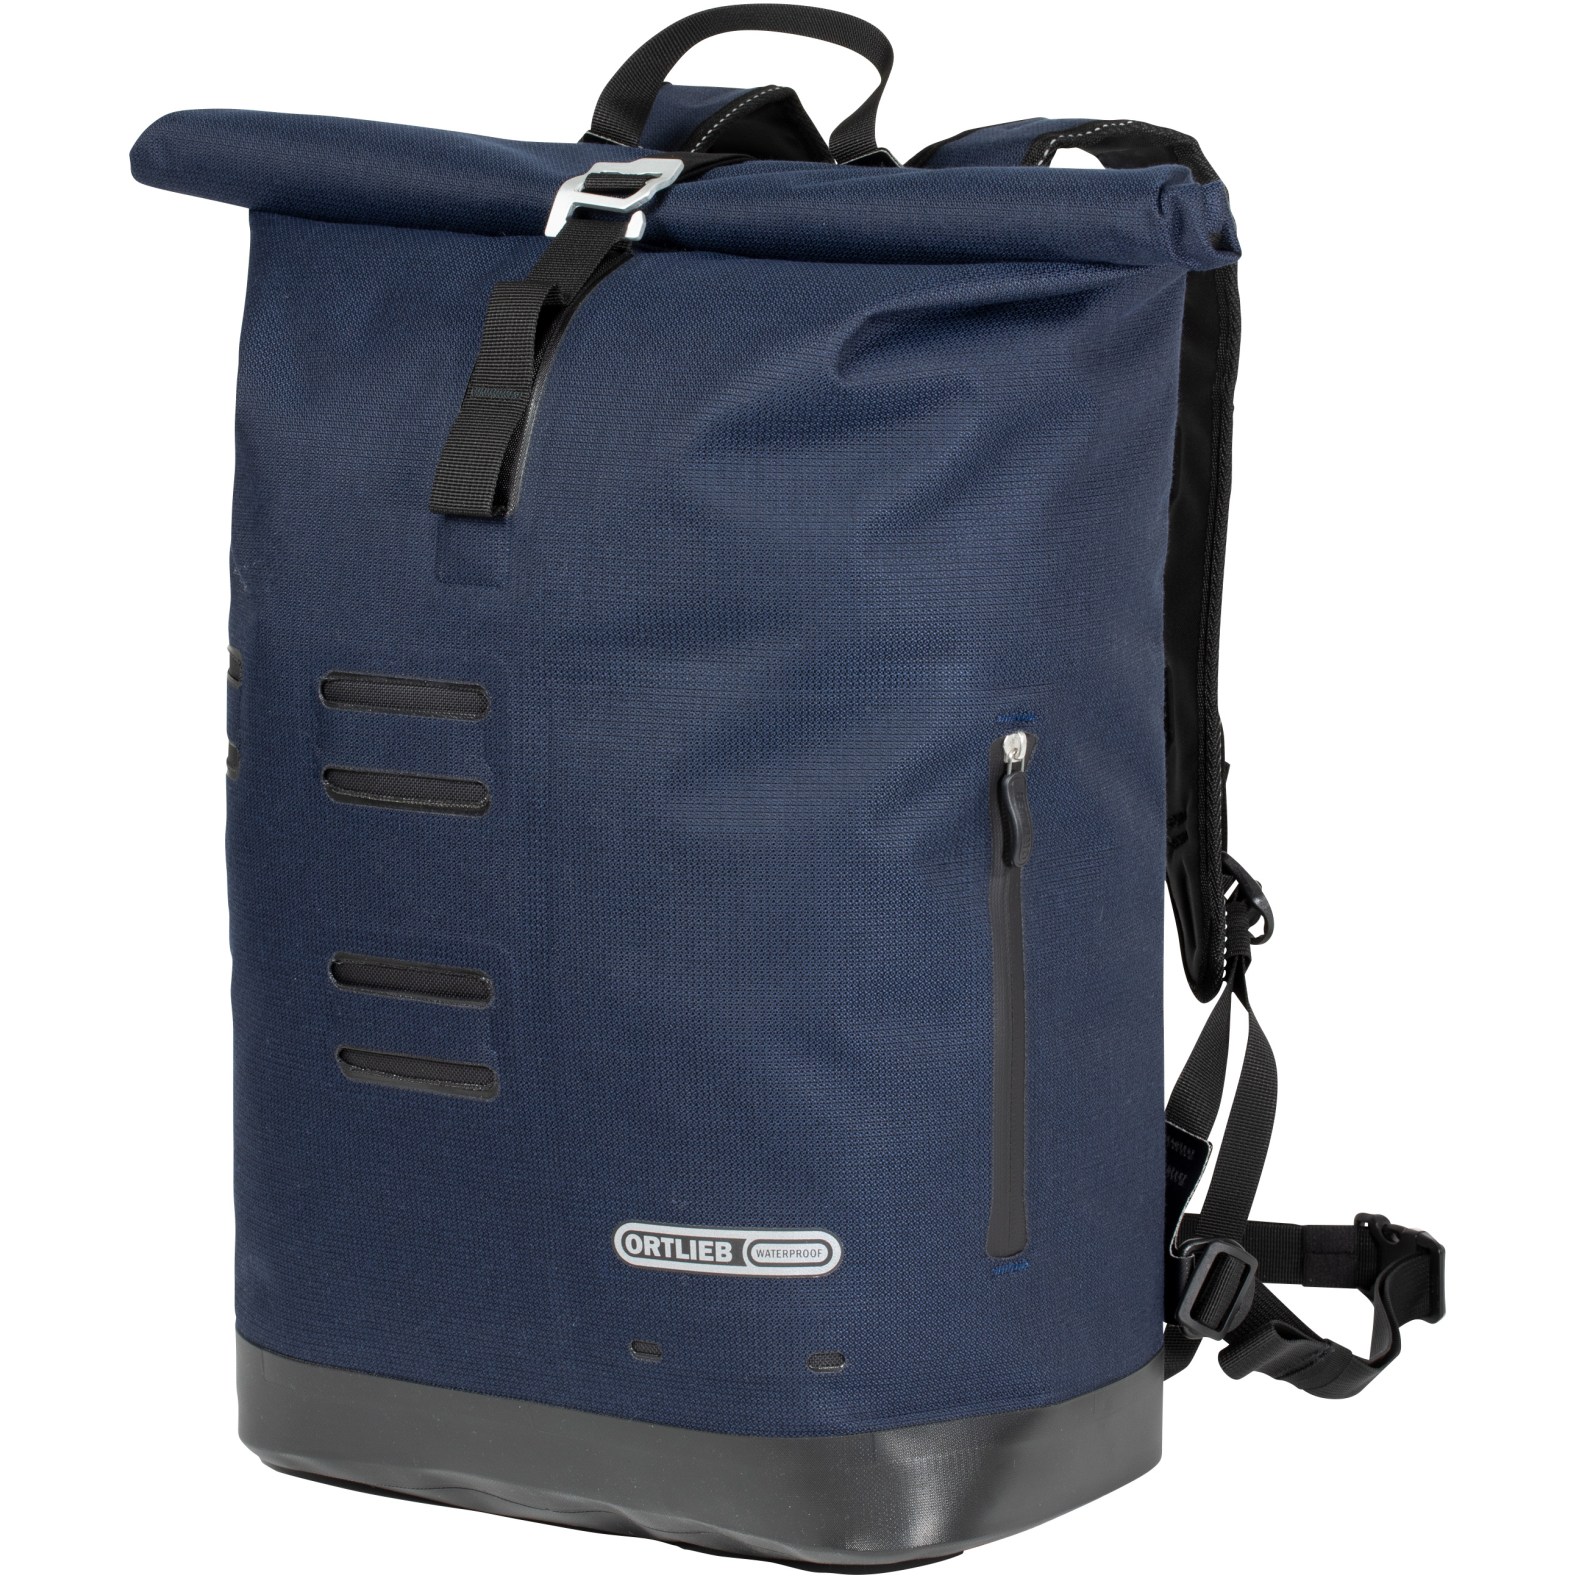 Image of ORTLIEB Commuter Daypack Urban - 27L Backpack - ink